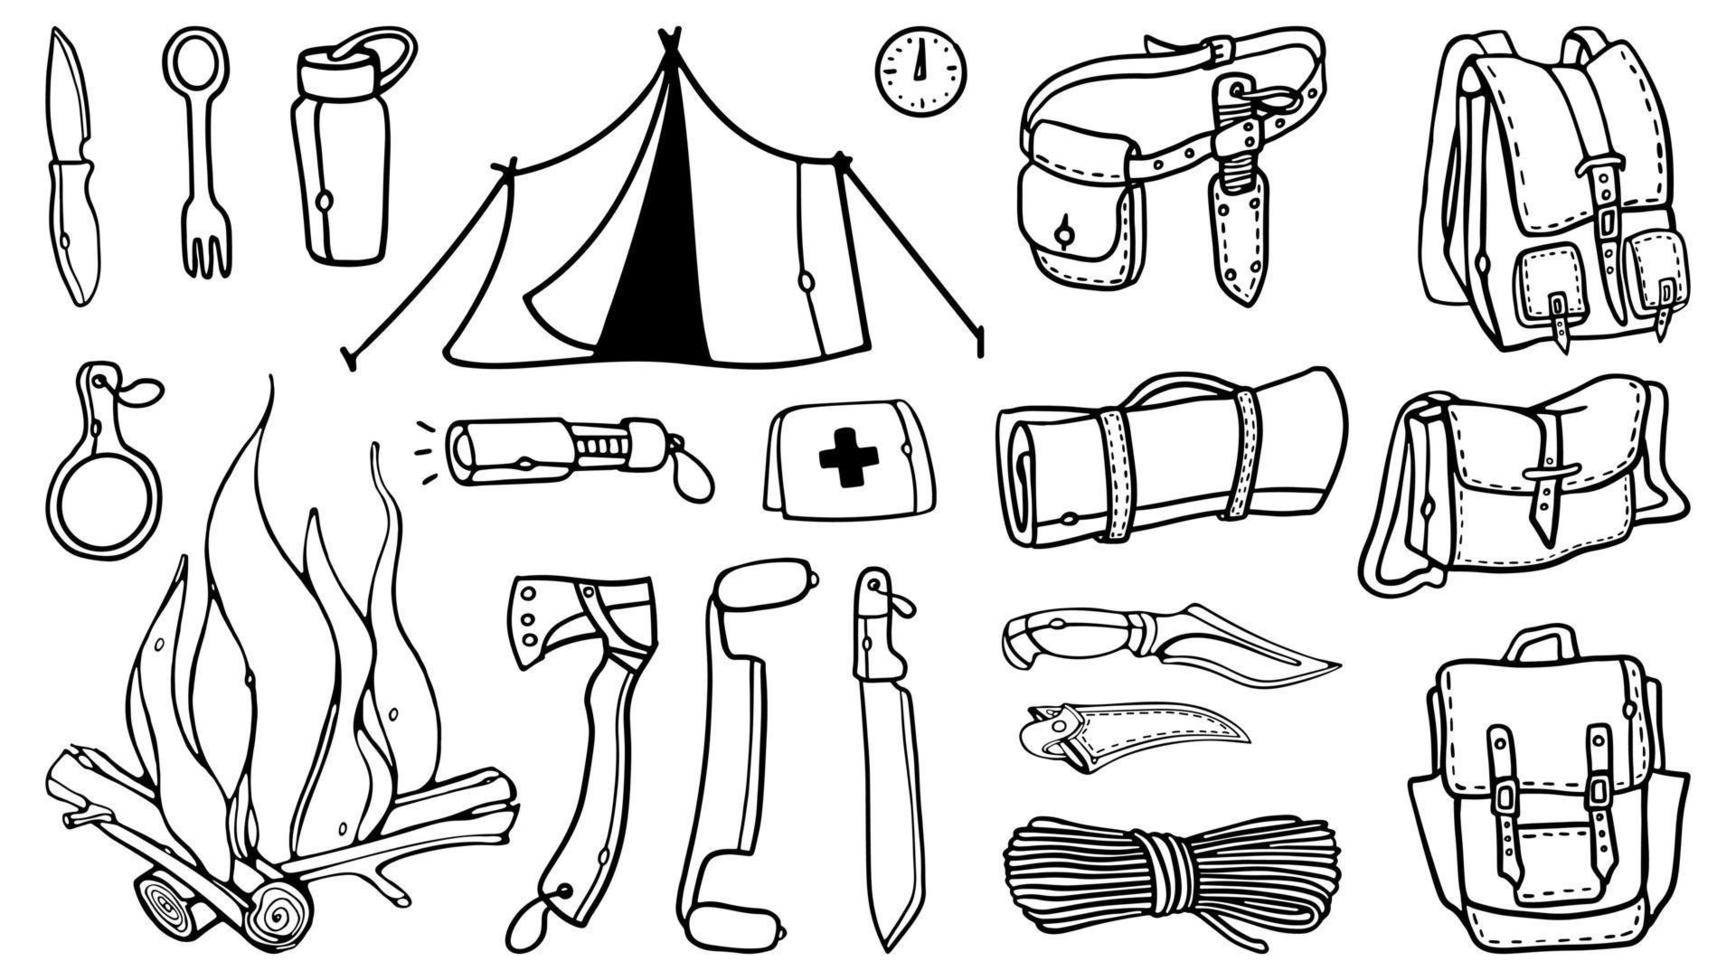 Survival Gear Kit Vector illustration. Bushcraft Outdoor Adventure Prepper Survival Equipment. Set of Hiking and Camping items in outline doodle style.